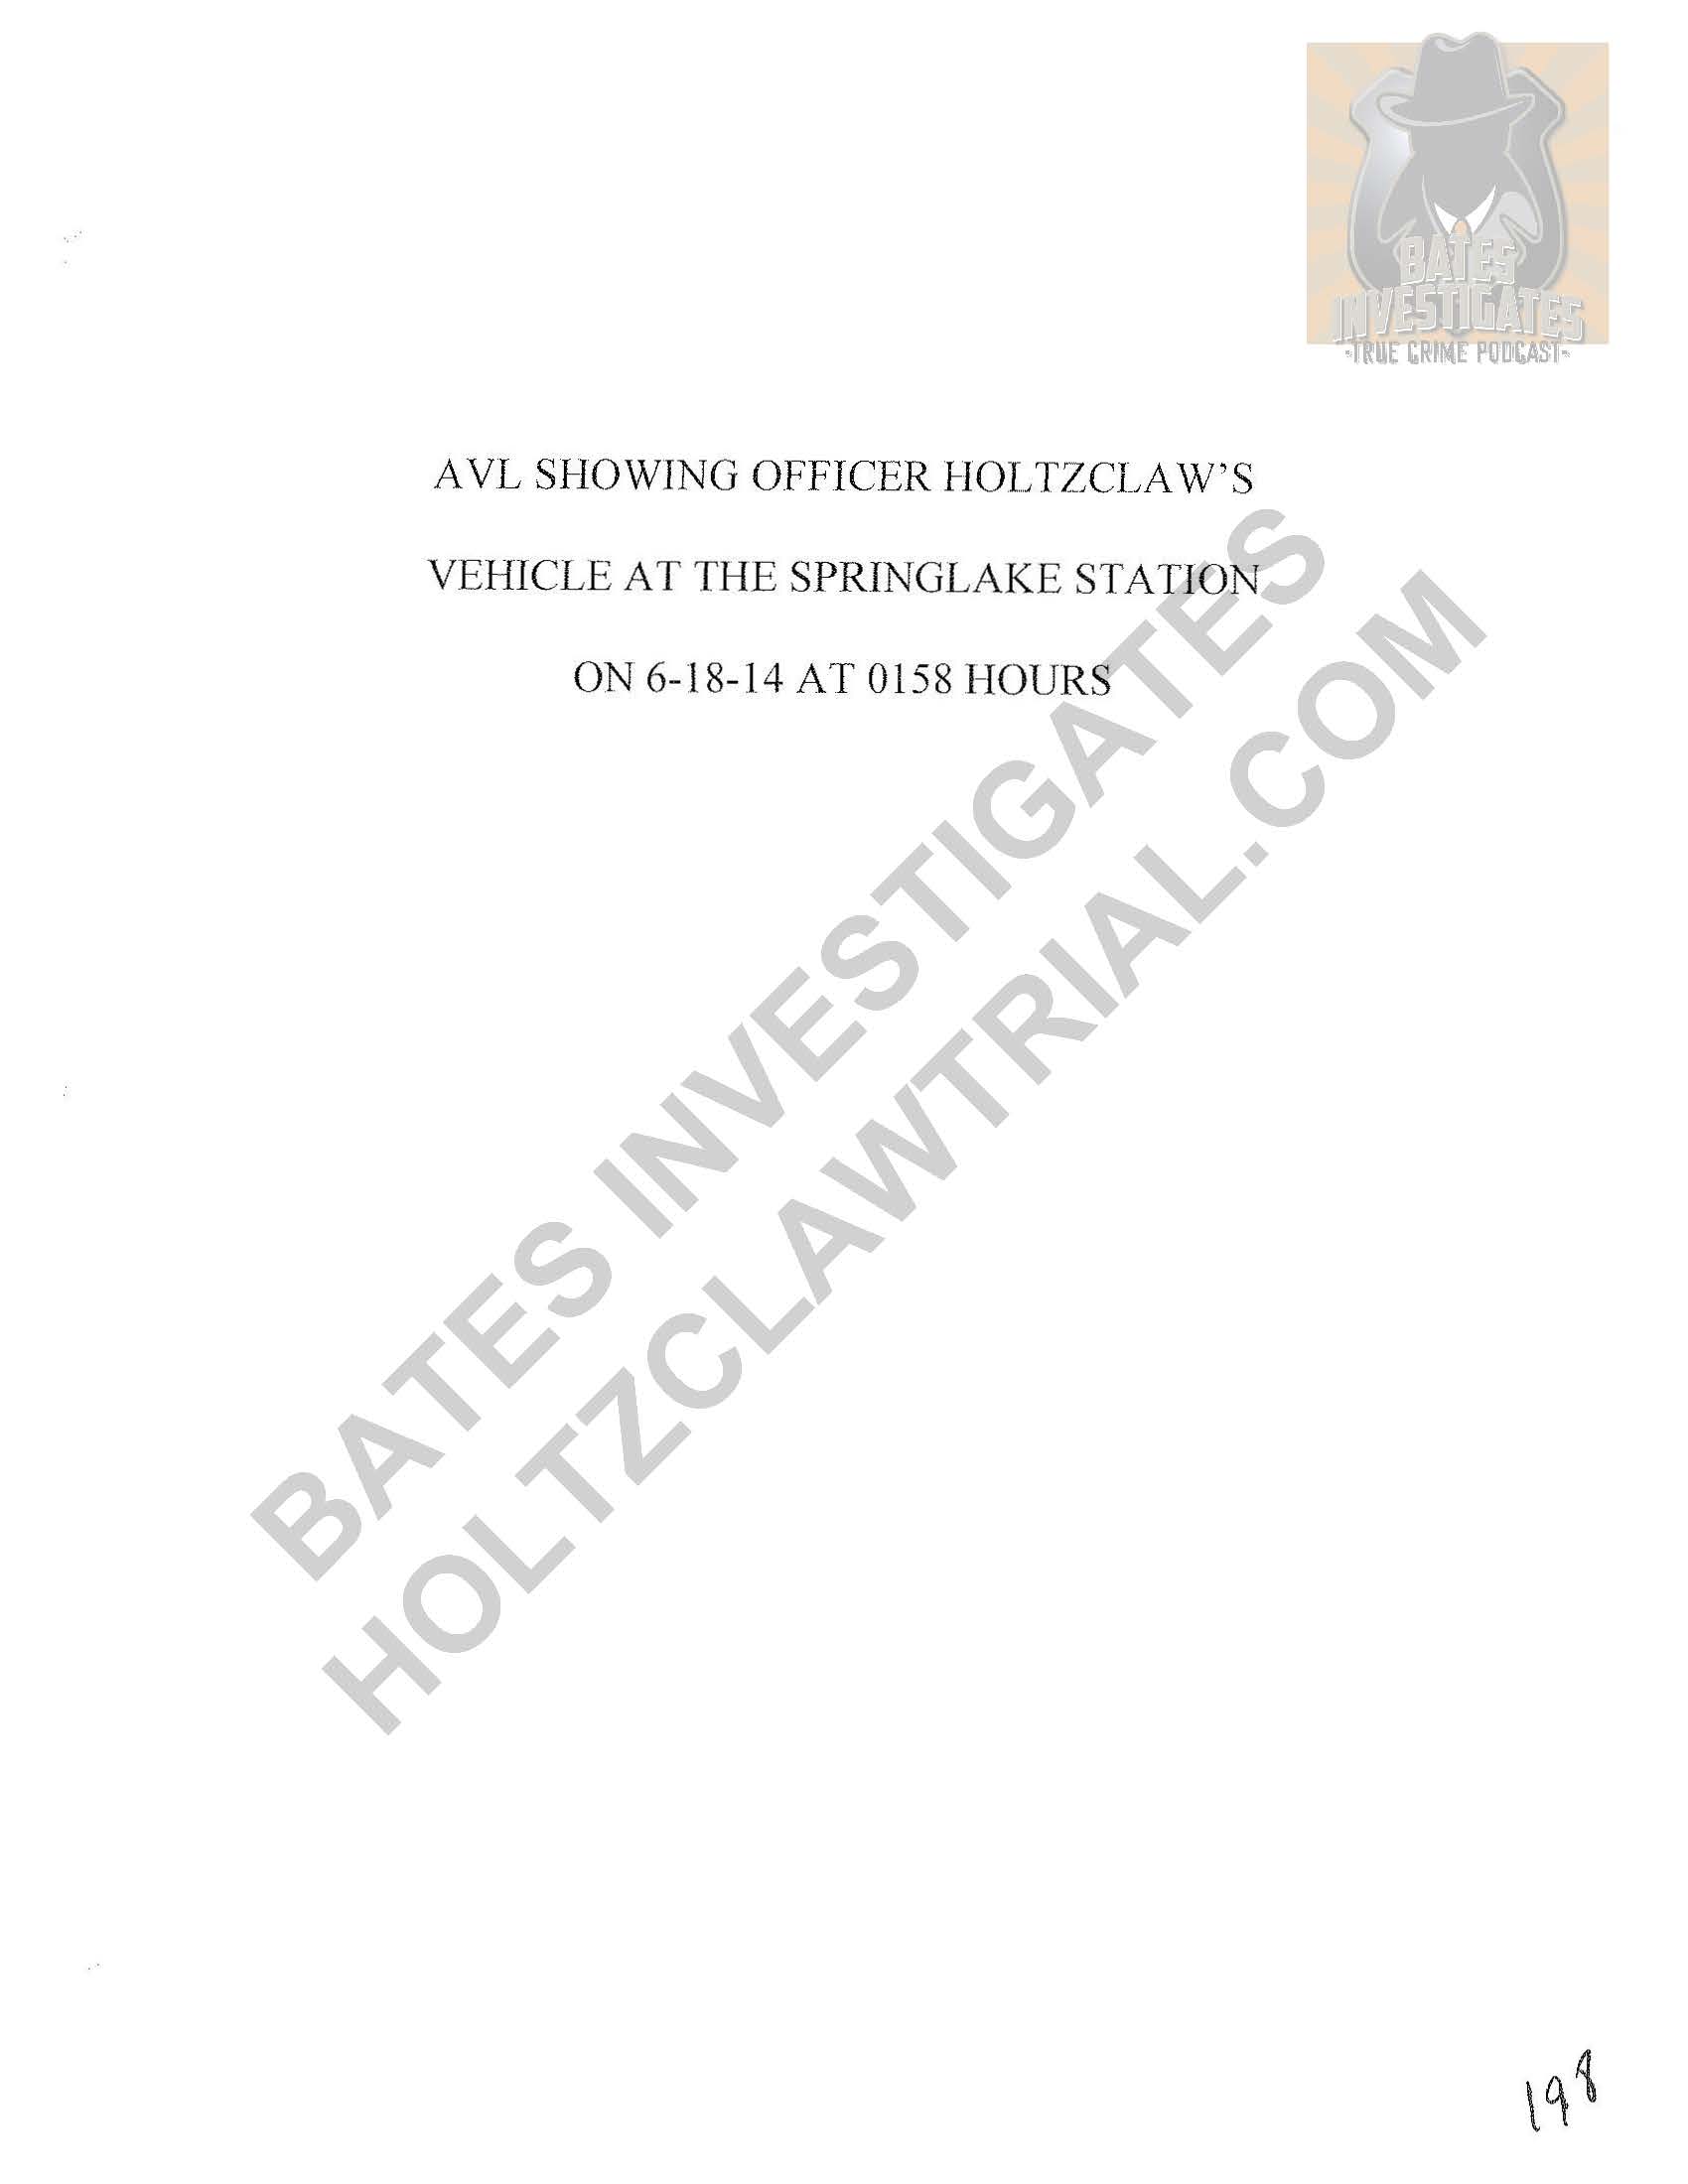 Holtzclaw - Ep02 - Police Reports Watermarked_Page_01.jpg